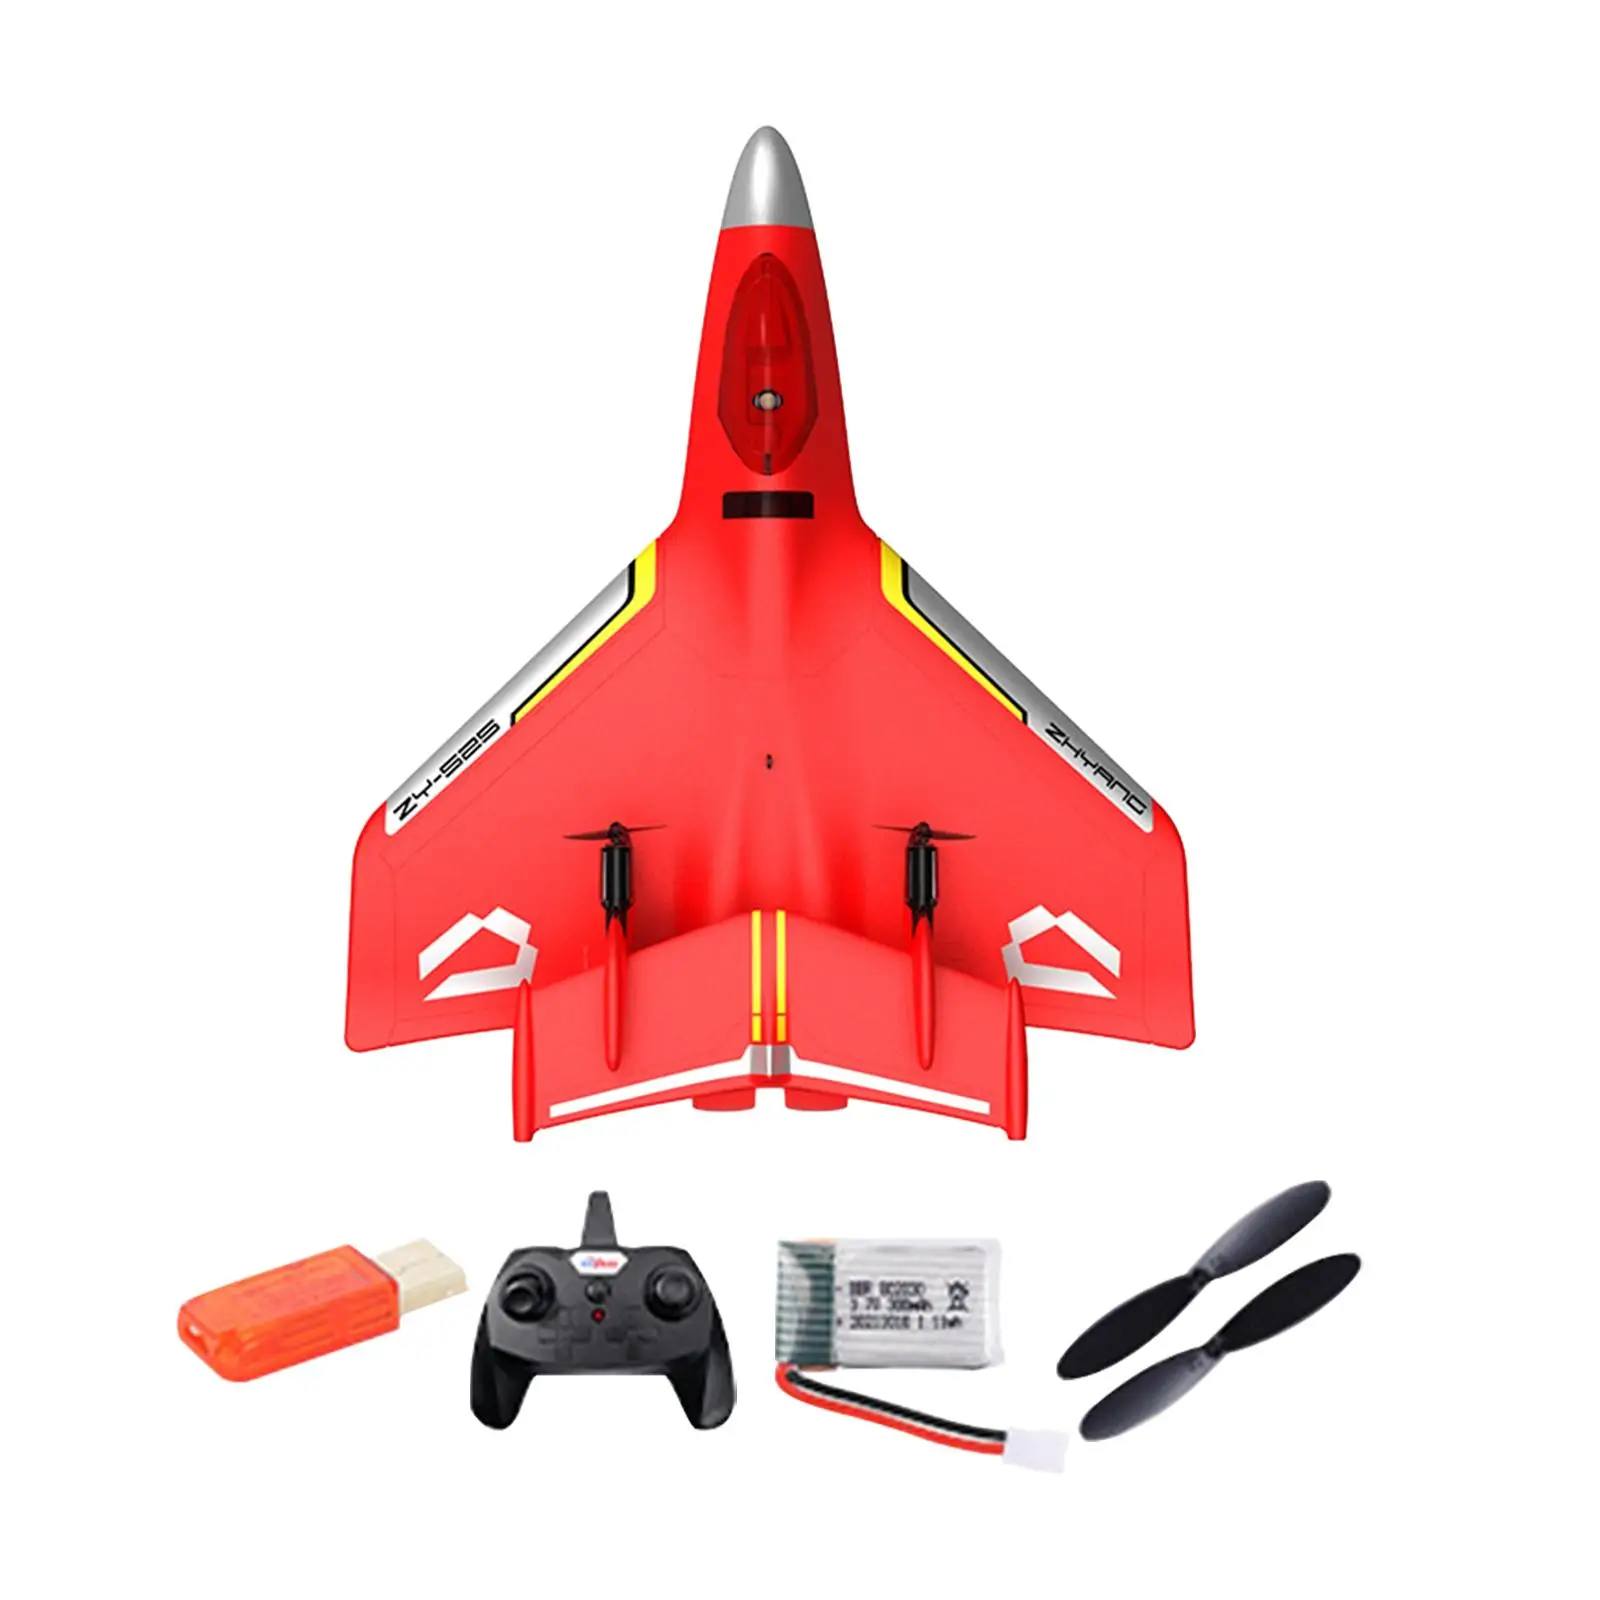 Hobby RC Airplane with LED Lights Plane Model Fixed Wing RC Fighter for Holiday Present Xmas Gifts Girls Boys Beginner Adults